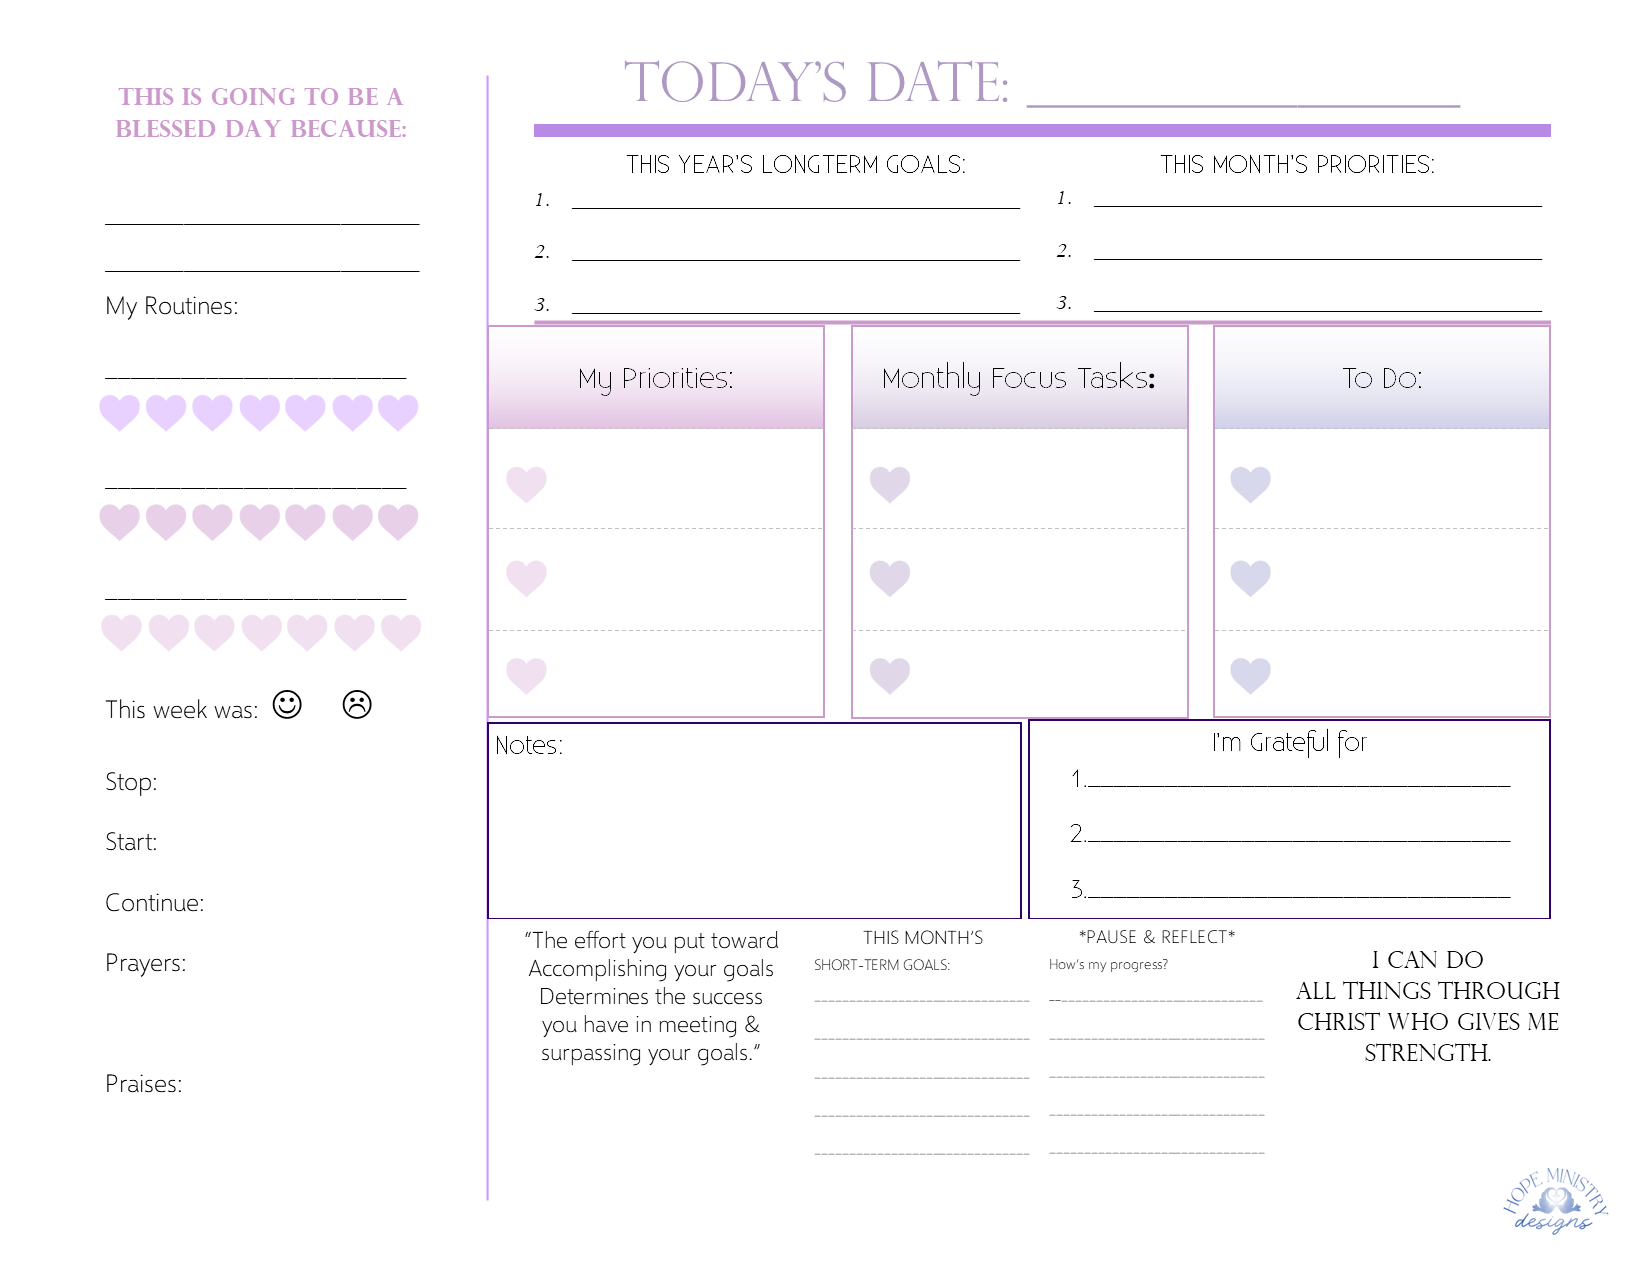 Modern aesthetic goal-tracking daily planner - free download